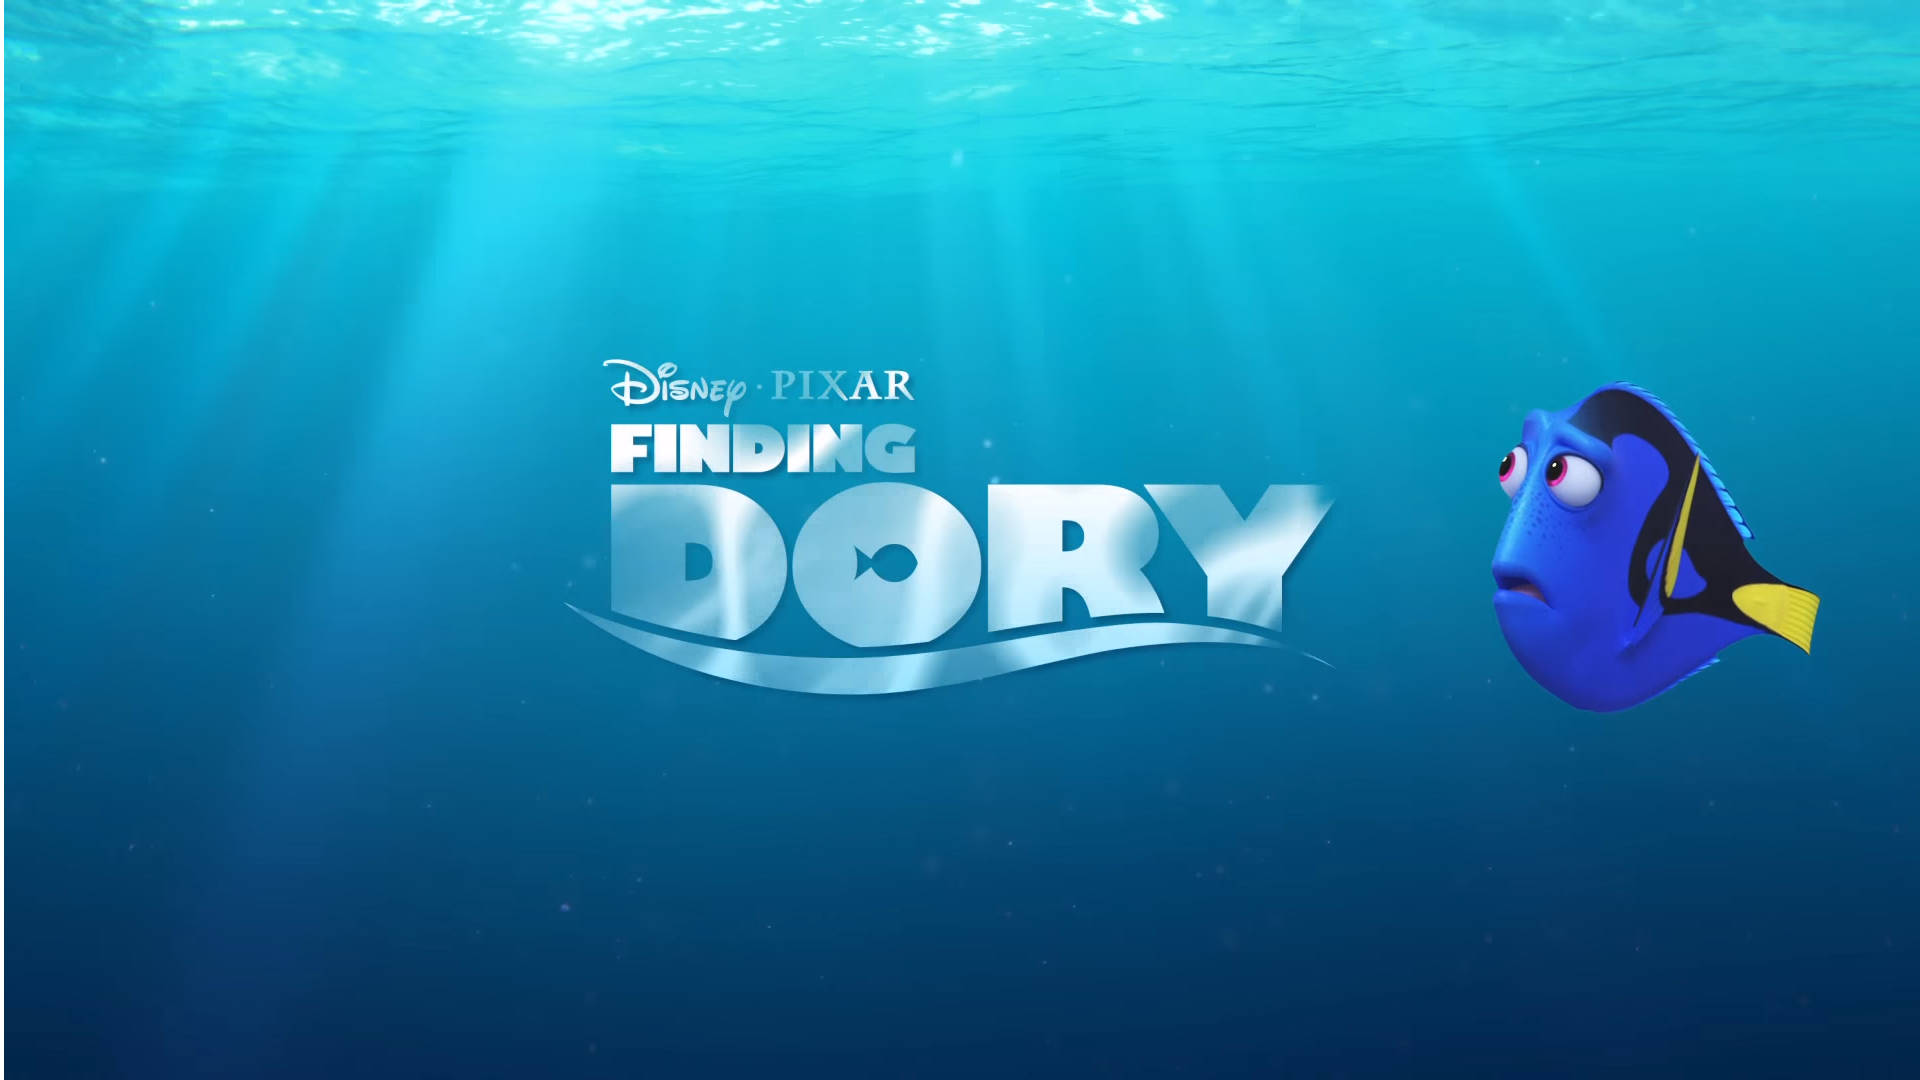 Finding Dory Poster Bluish Ocean Background Background